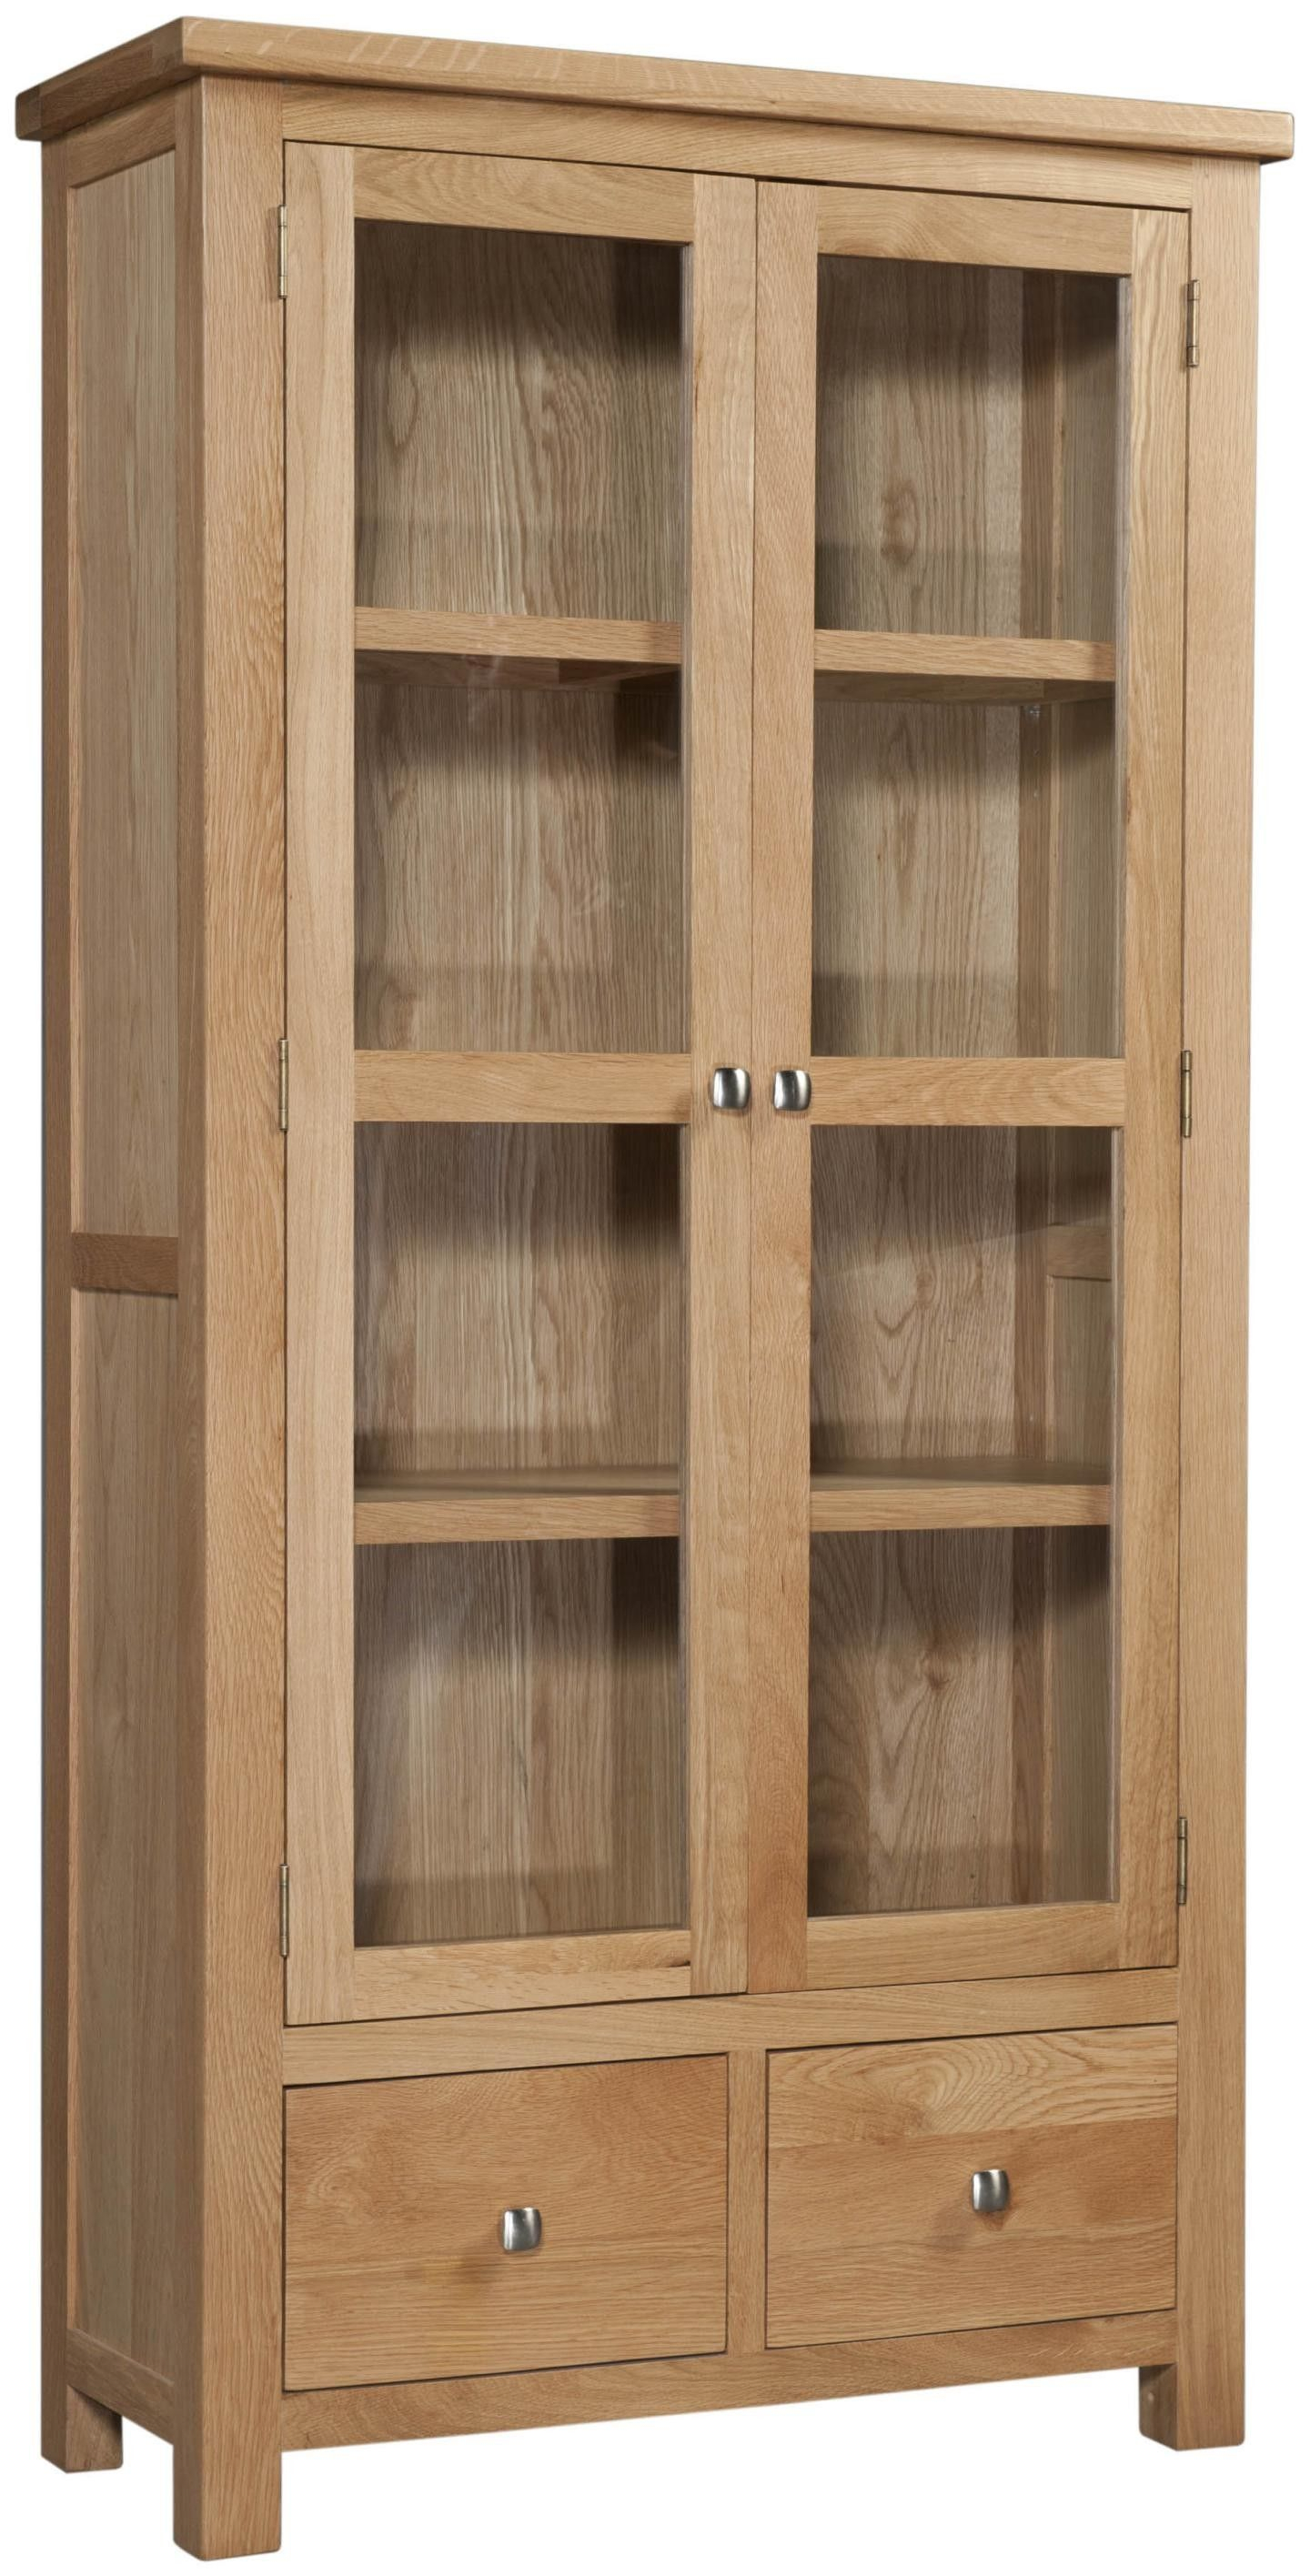 Abbey Oak Display Cabinet With Glass Doors Muebles De Madera within size 1440 X 2832